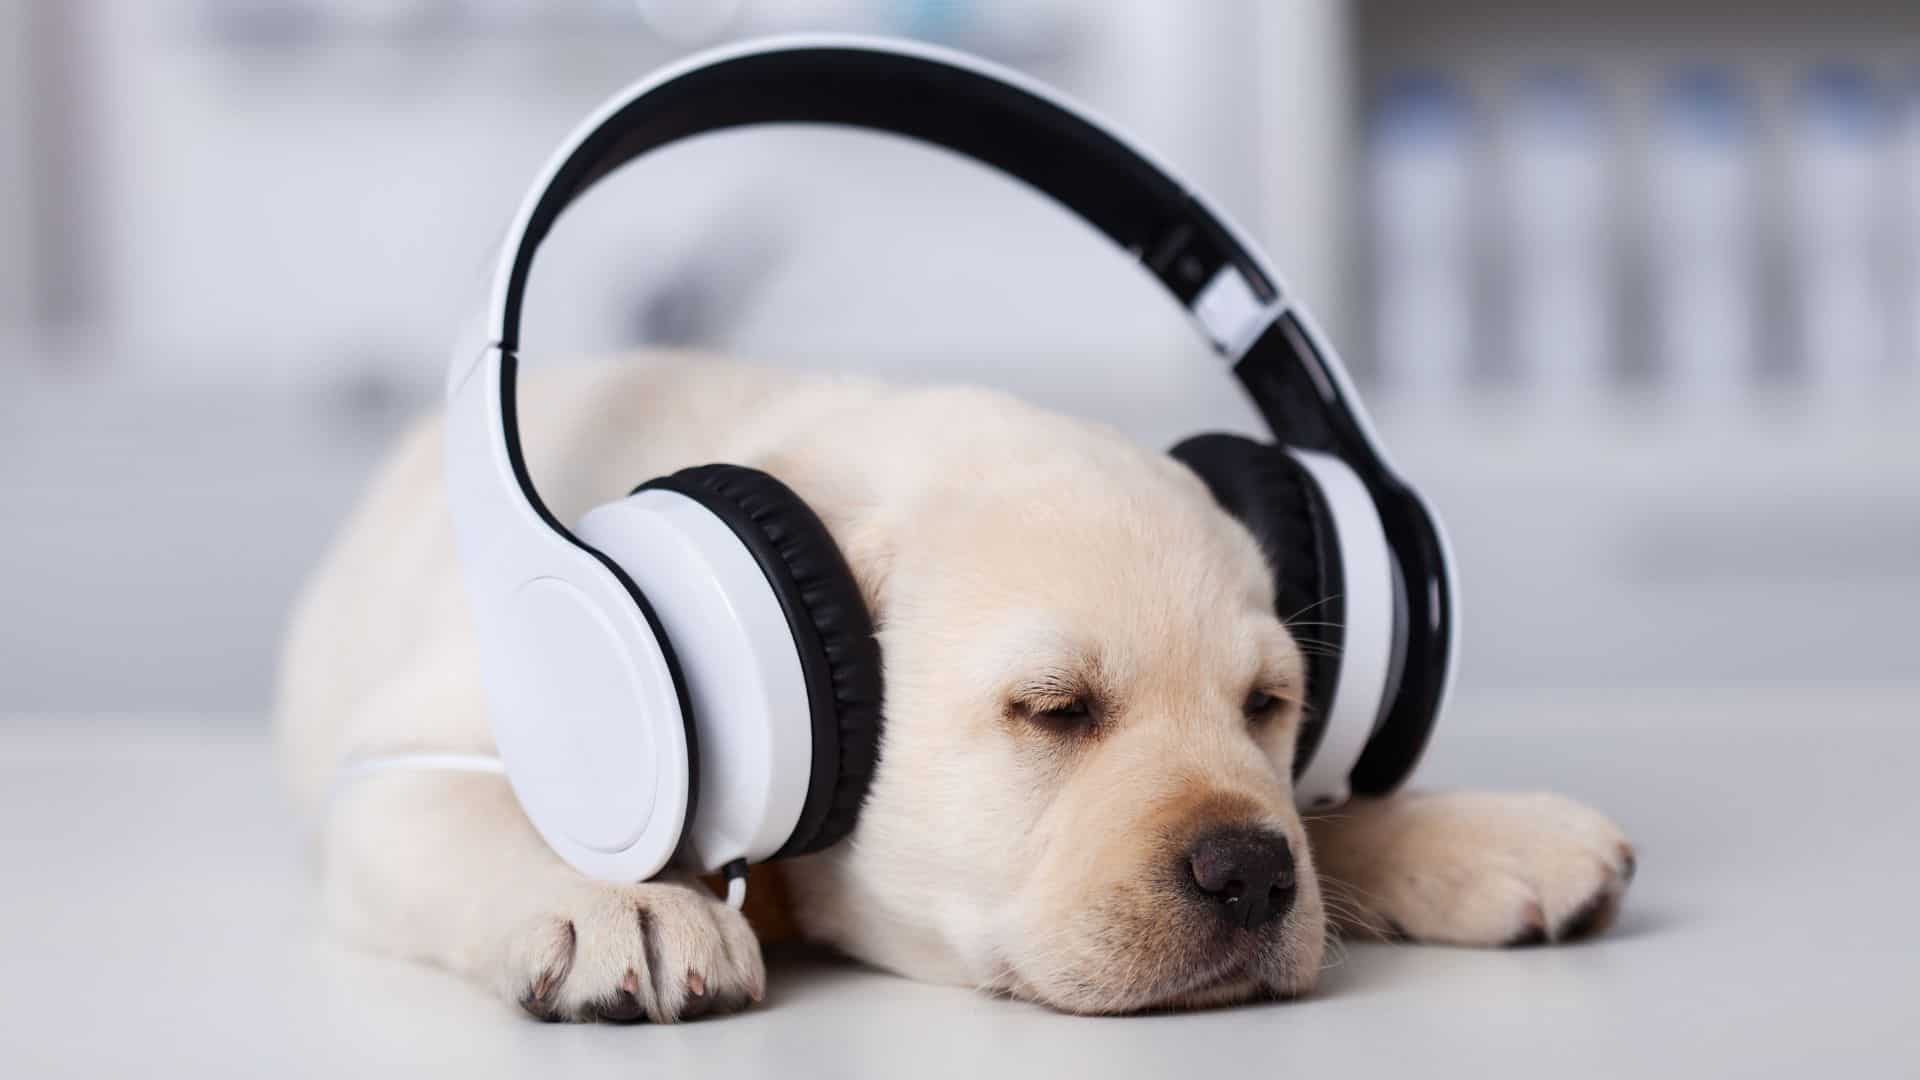 How Various Types Of Music Affect Dogs